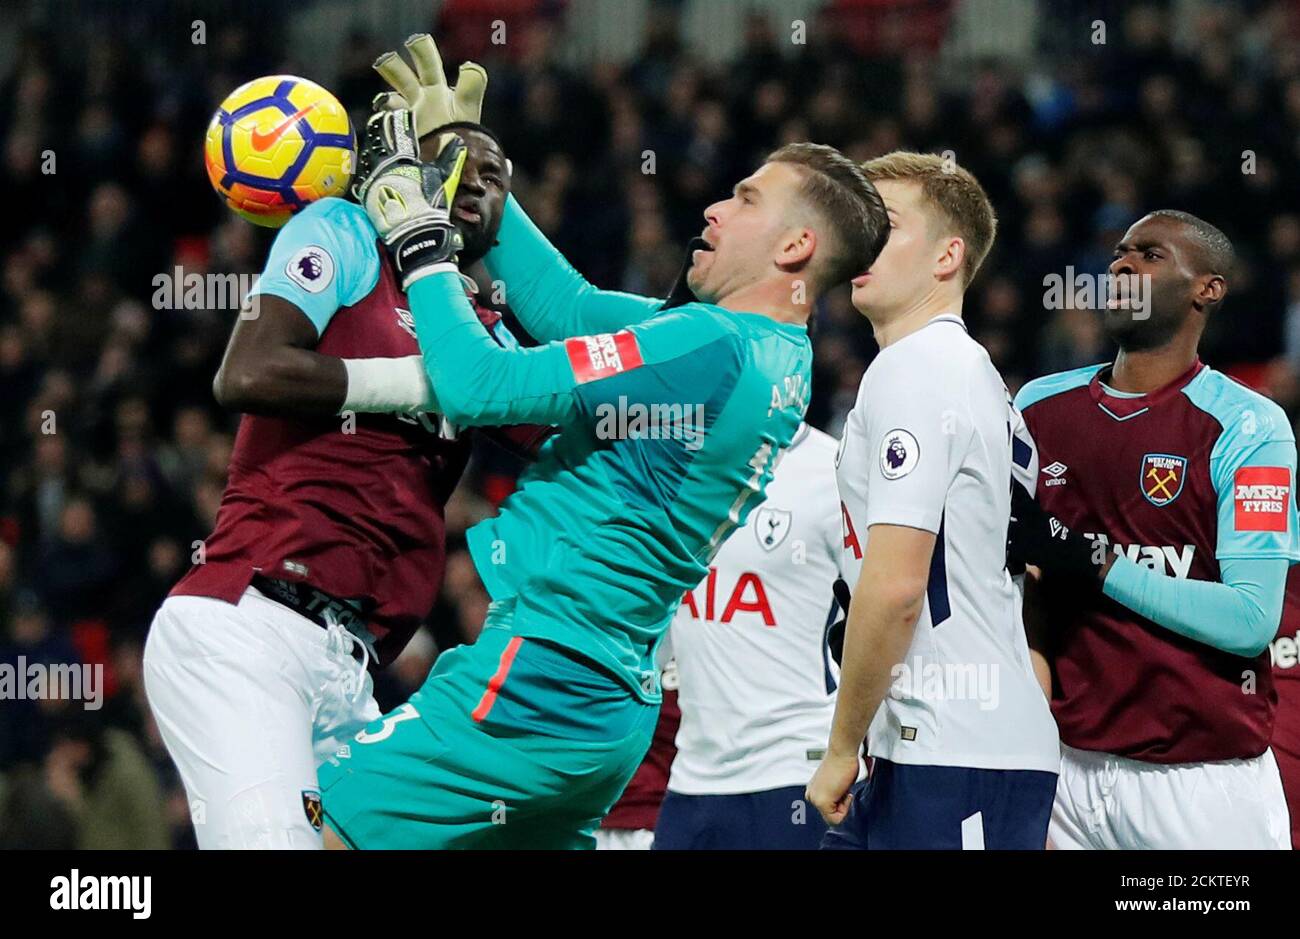 Soccer Football - Premier League - Tottenham Hotspur vs West Ham United - Wembley Stadium, London, Britain - January 4, 2018   West Ham United's Adrian collides with Cheikhou Kouyate as he attempts to gather the ball   REUTERS/Eddie Keogh    EDITORIAL USE ONLY. No use with unauthorized audio, video, data, fixture lists, club/league logos or 'live' services. Online in-match use limited to 75 images, no video emulation. No use in betting, games or single club/league/player publications.  Please contact your account representative for further details. Stock Photo